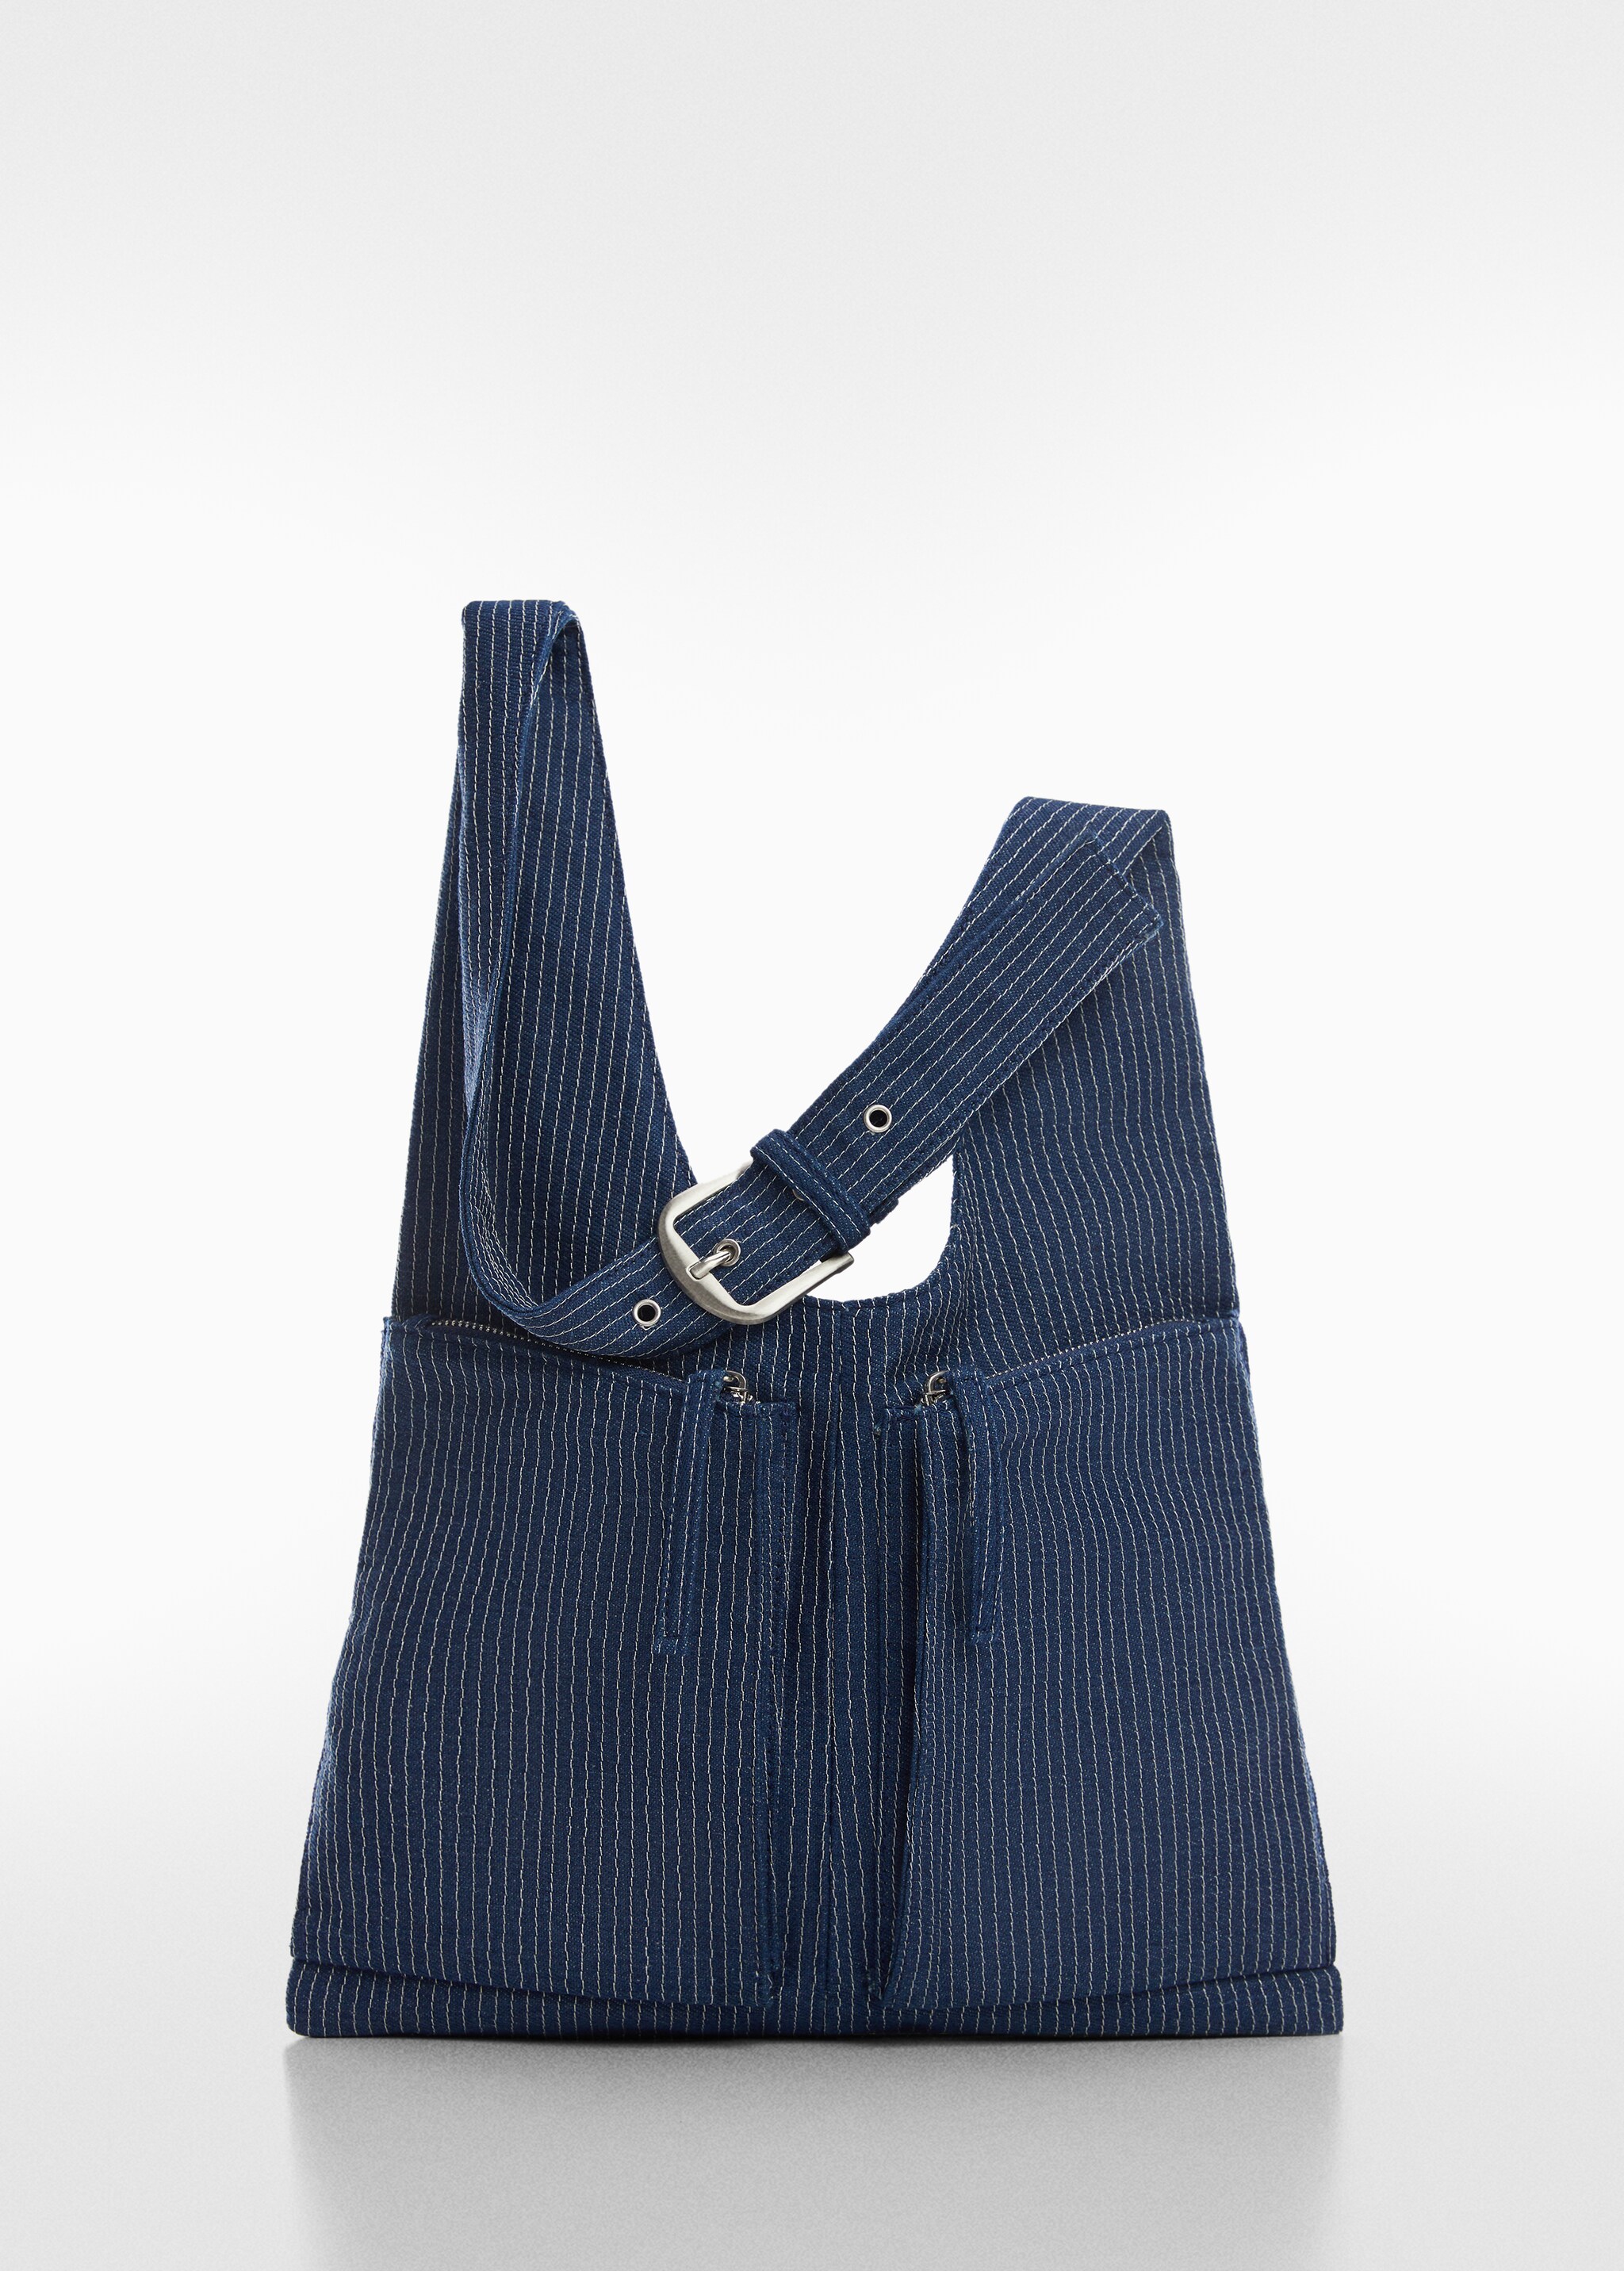 Denim bag with pockets - Article without model